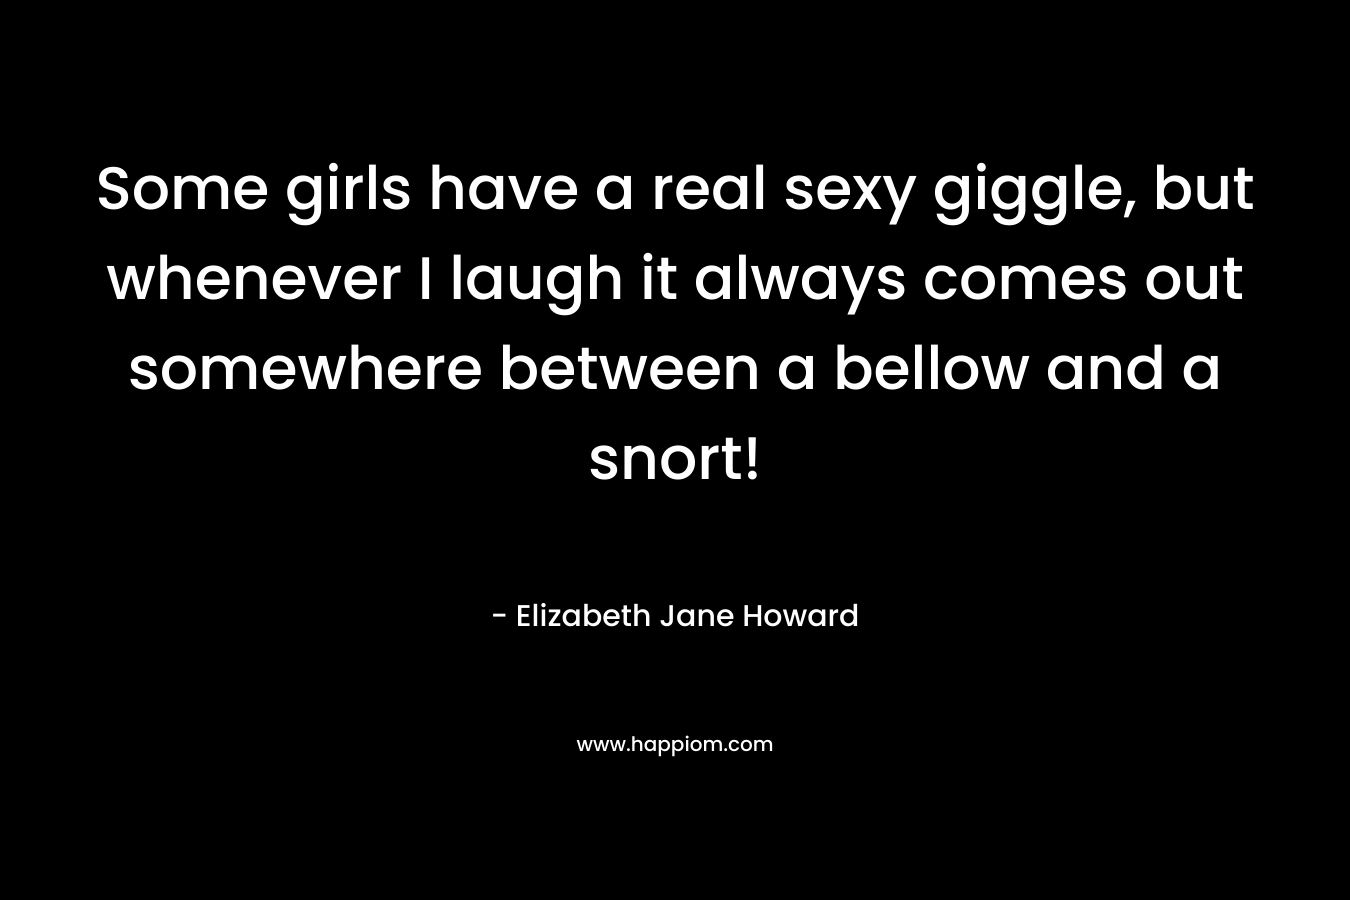 Some girls have a real sexy giggle, but whenever I laugh it always comes out somewhere between a bellow and a snort! – Elizabeth Jane Howard